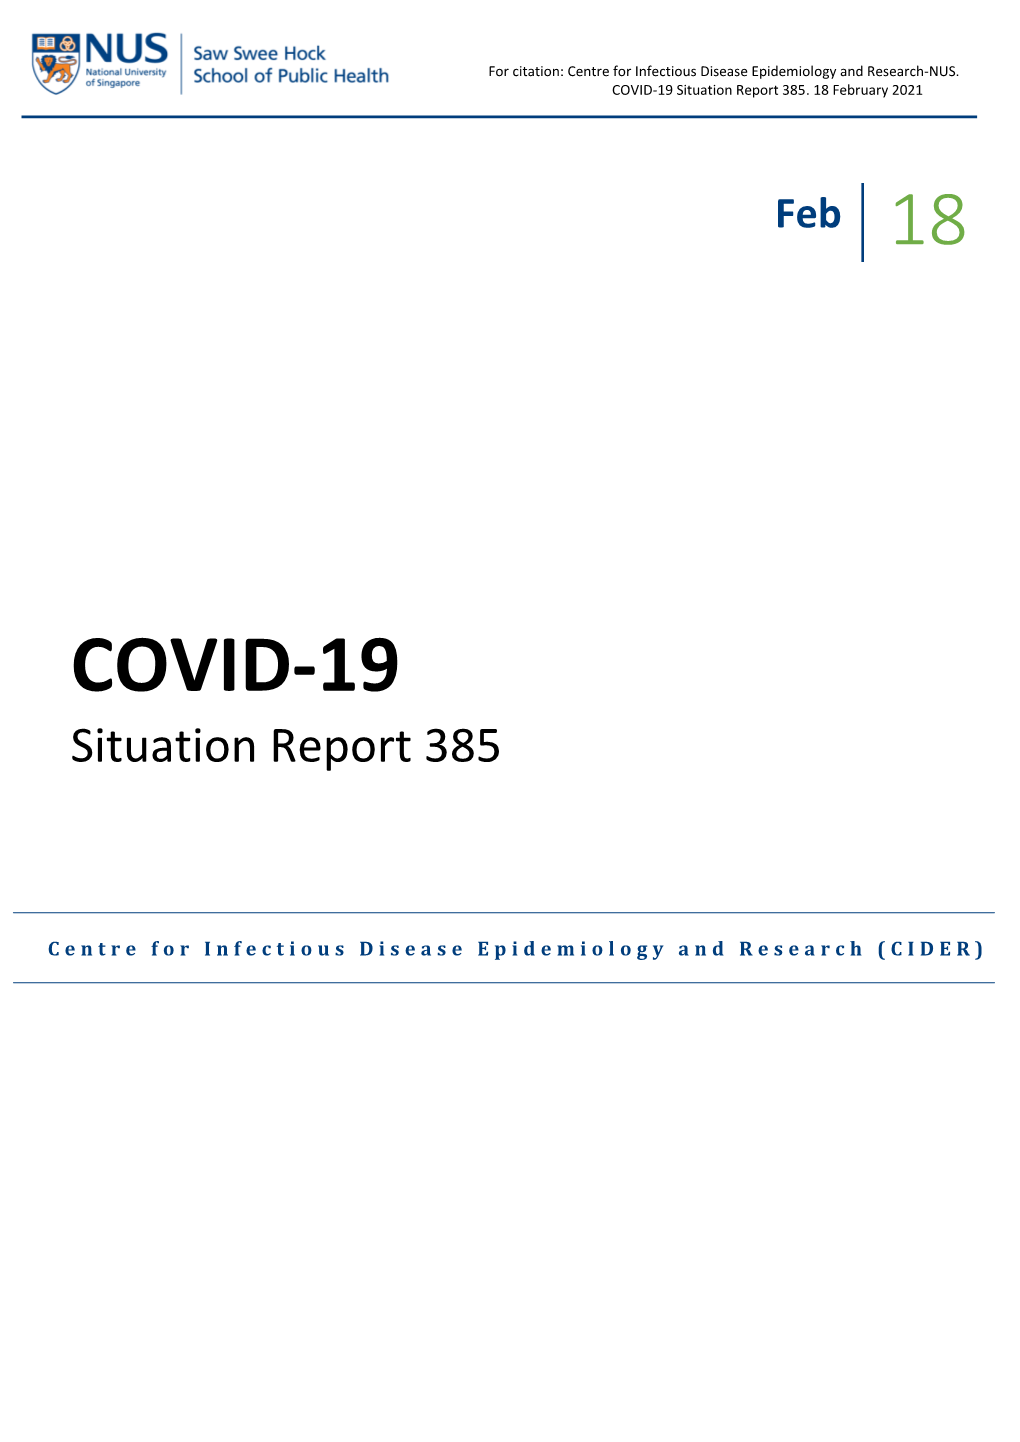 COVID-19 Situation Report 385